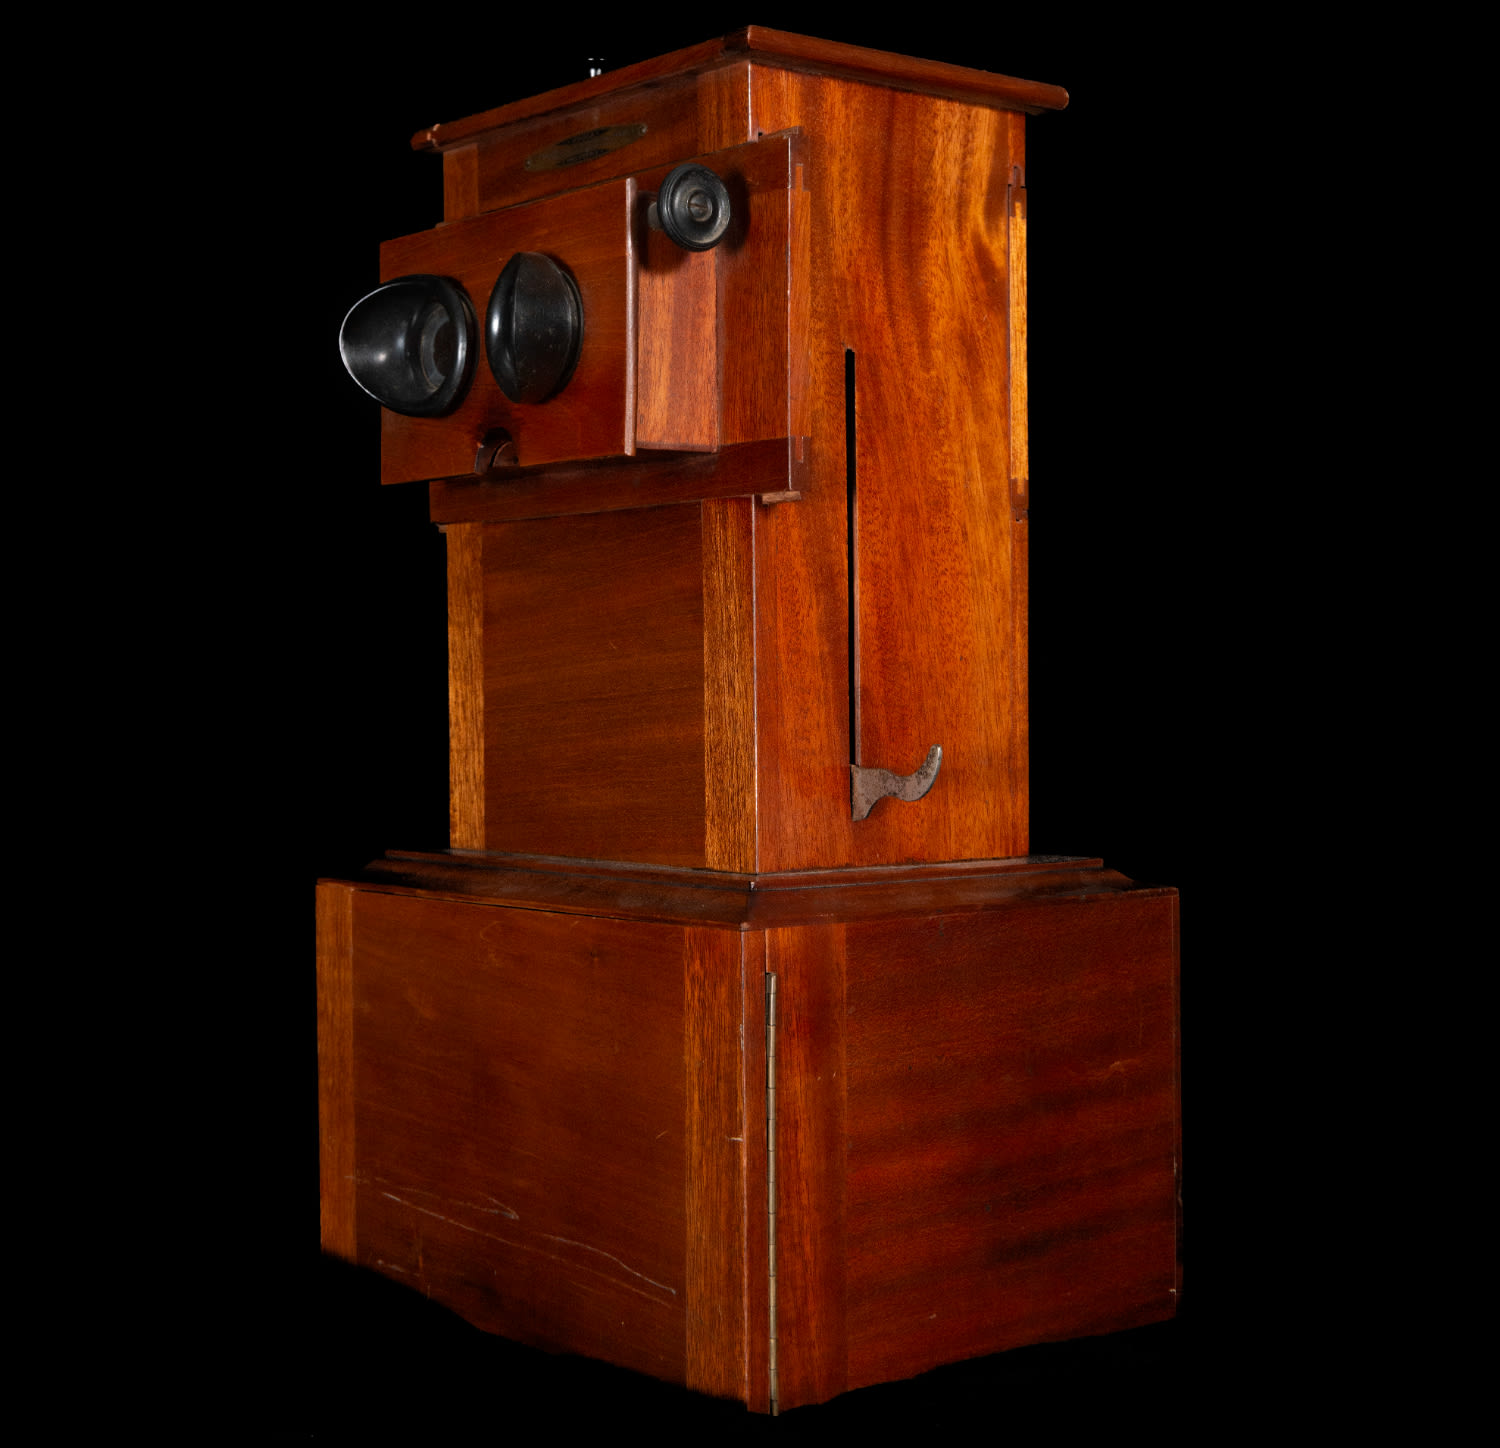 19th century slide projector - Image 3 of 5